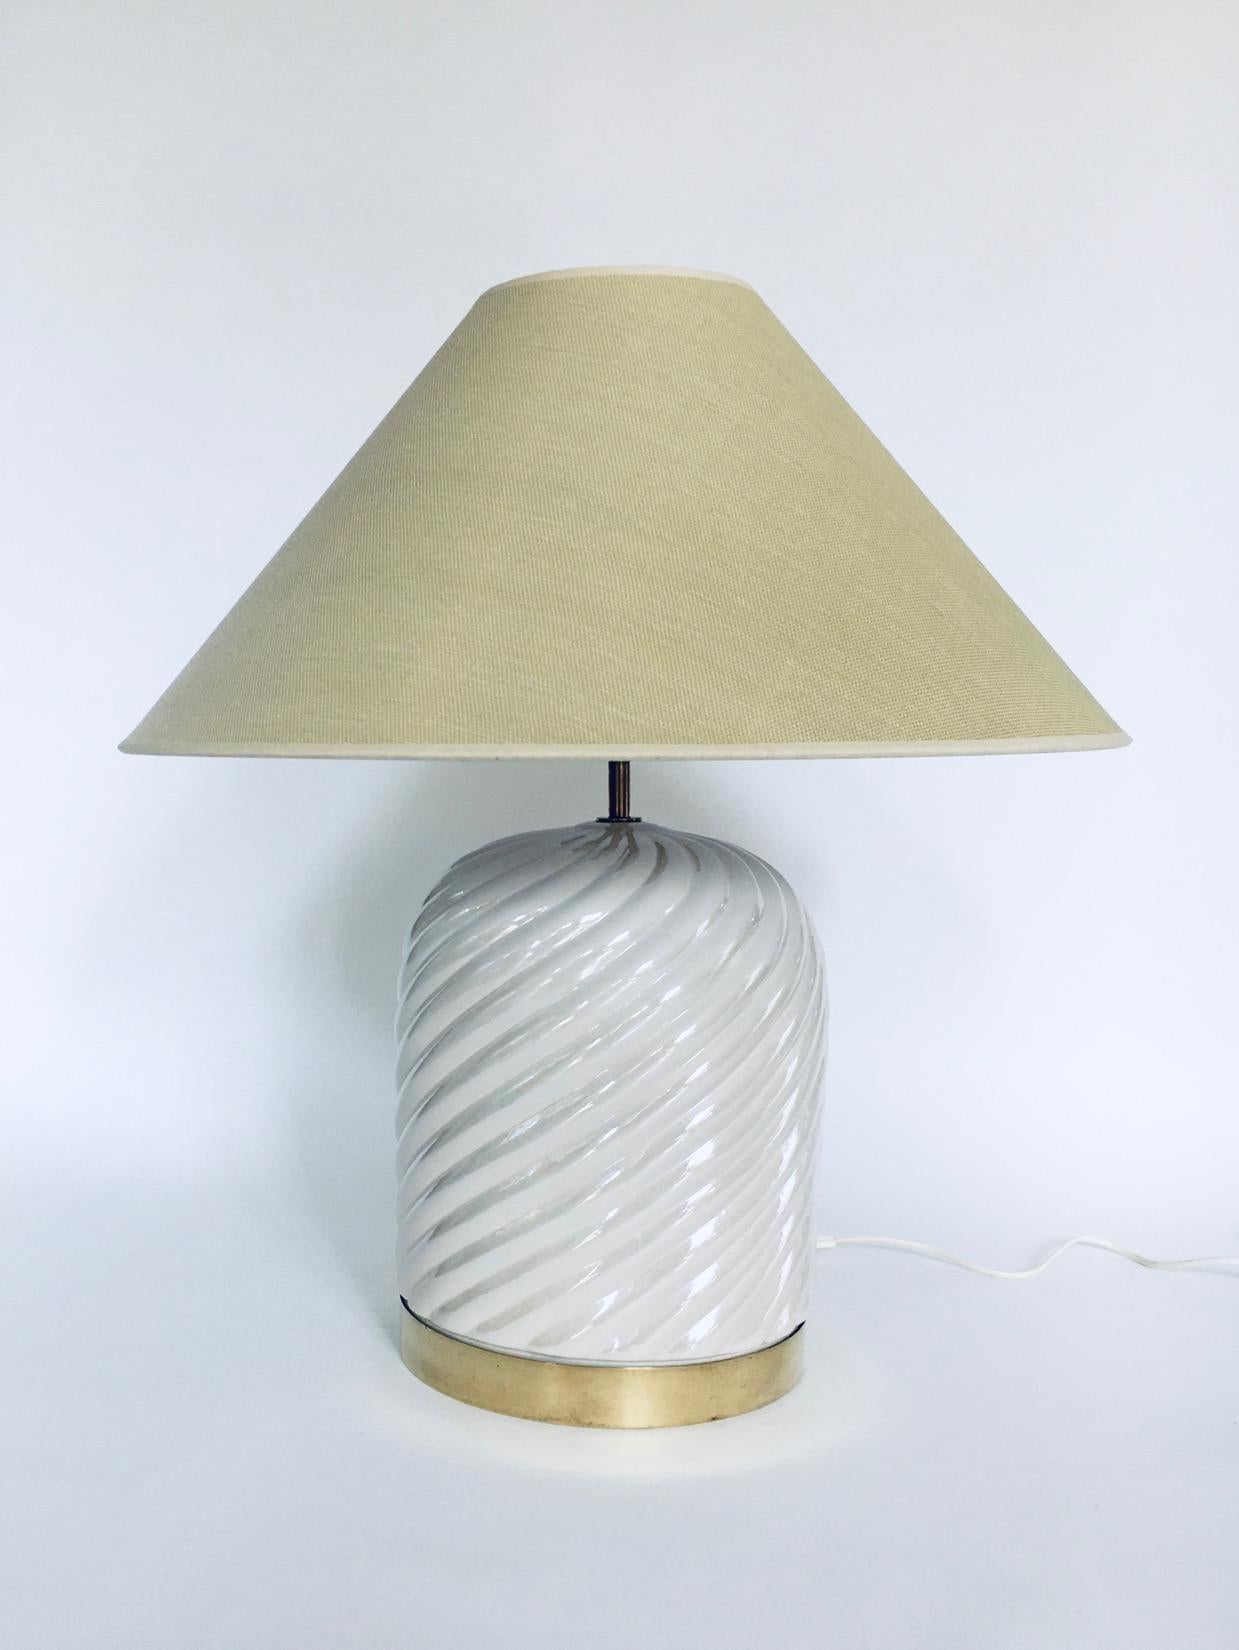 Vintage Postmodern Hollywood Regency Style Italian Design Table Lamp Set by Tommaso Barbi, made in Italy 1970's. Ceramichi, Ceramic base with brass trim table or side board lamp set of 2 with all new lampshades. Whipcream twisted ceramic base in a